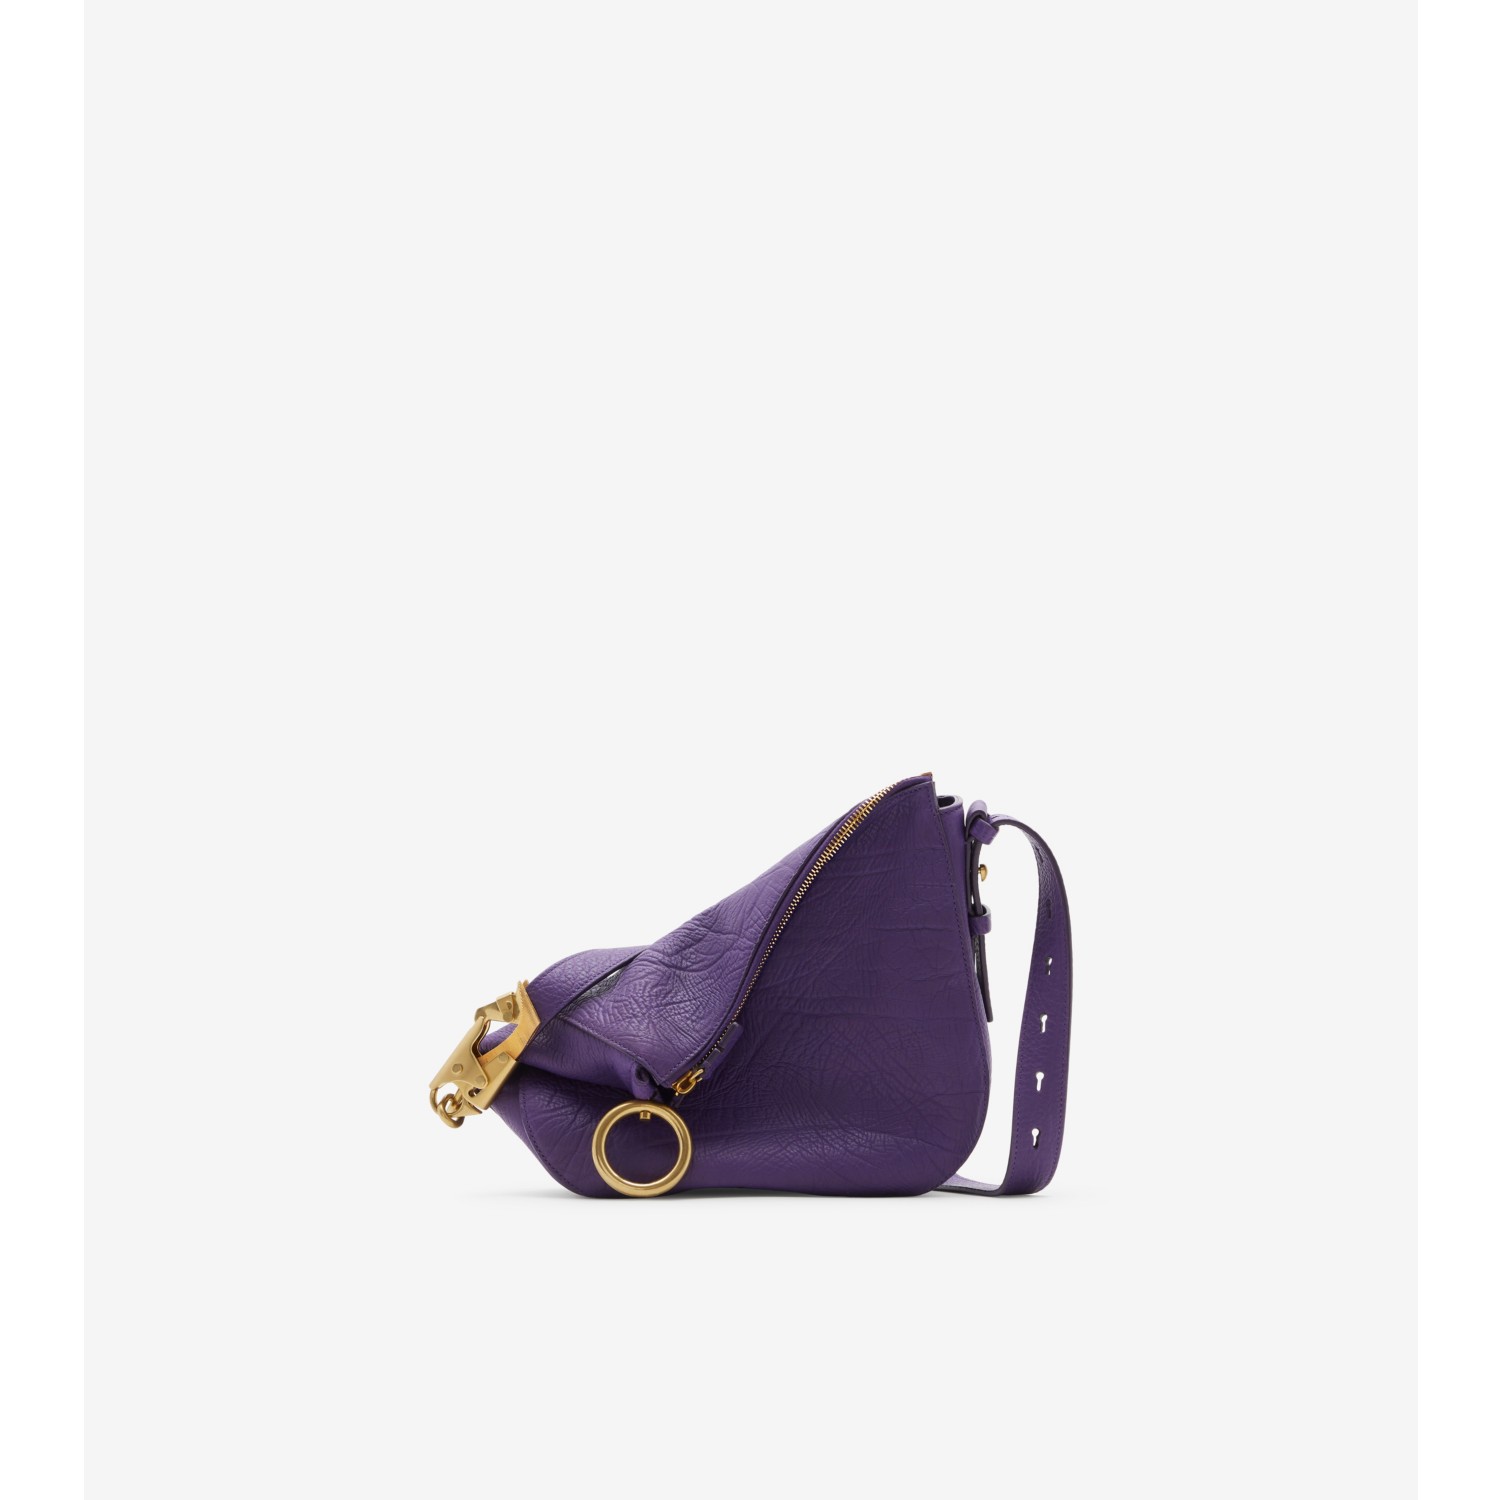 THAT MUCH PRICE FOR A TINY BAG? WHY?